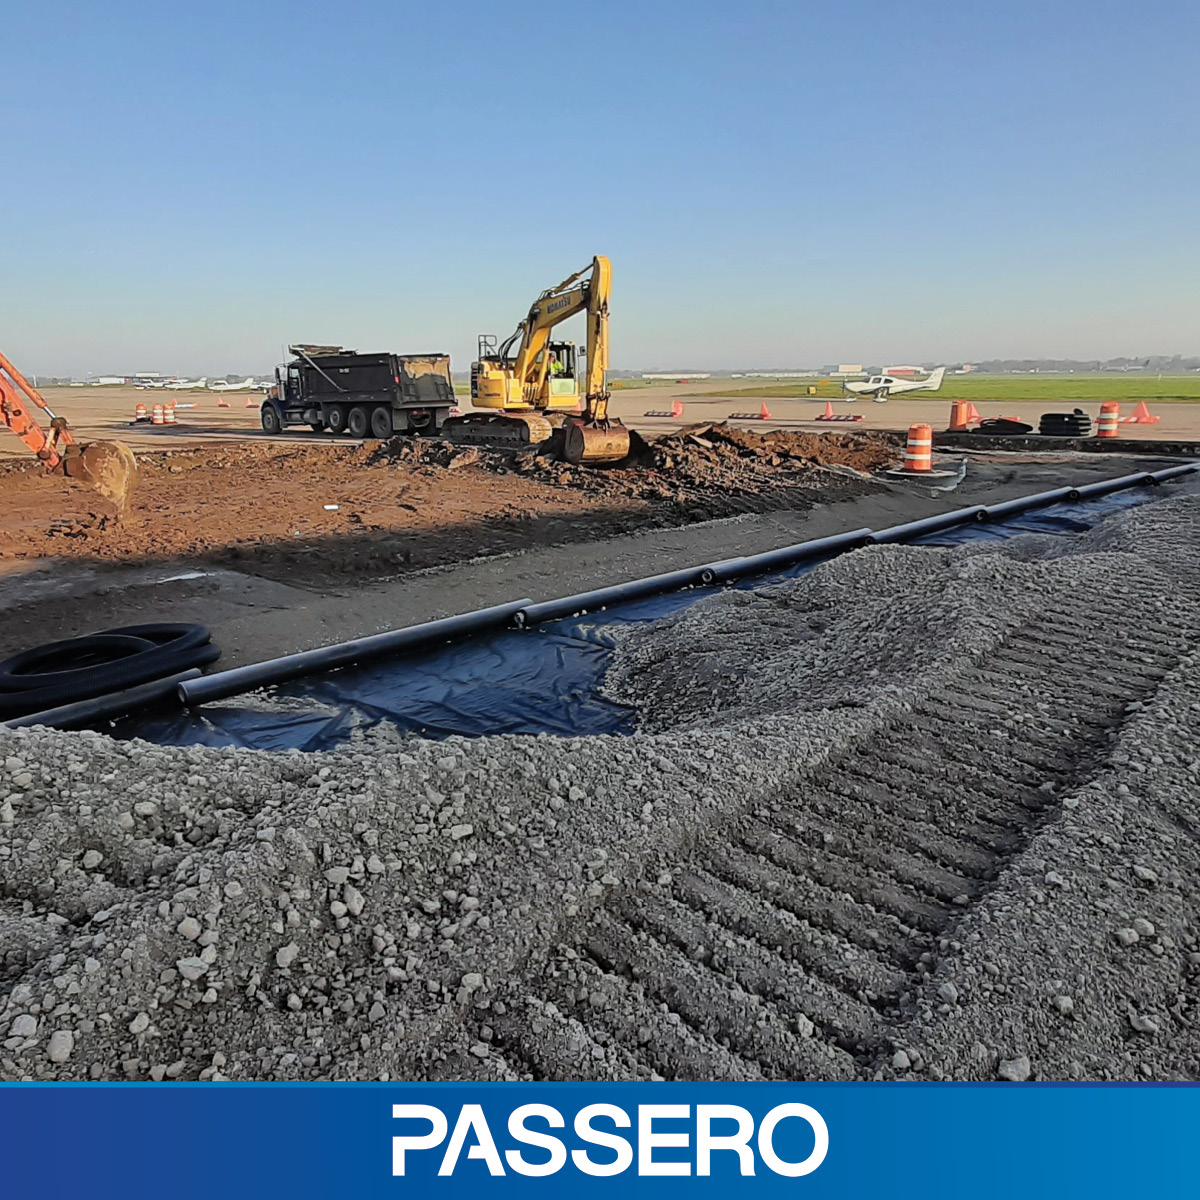 We're thrilled to announce the completion of the 300 Ramp Rehabilitation project at Frederick Douglass Greater Rochester International Airport (ROC) in Rochester, NY!

#AirportUpgrades #InfrastructureImprovements #FlyROC